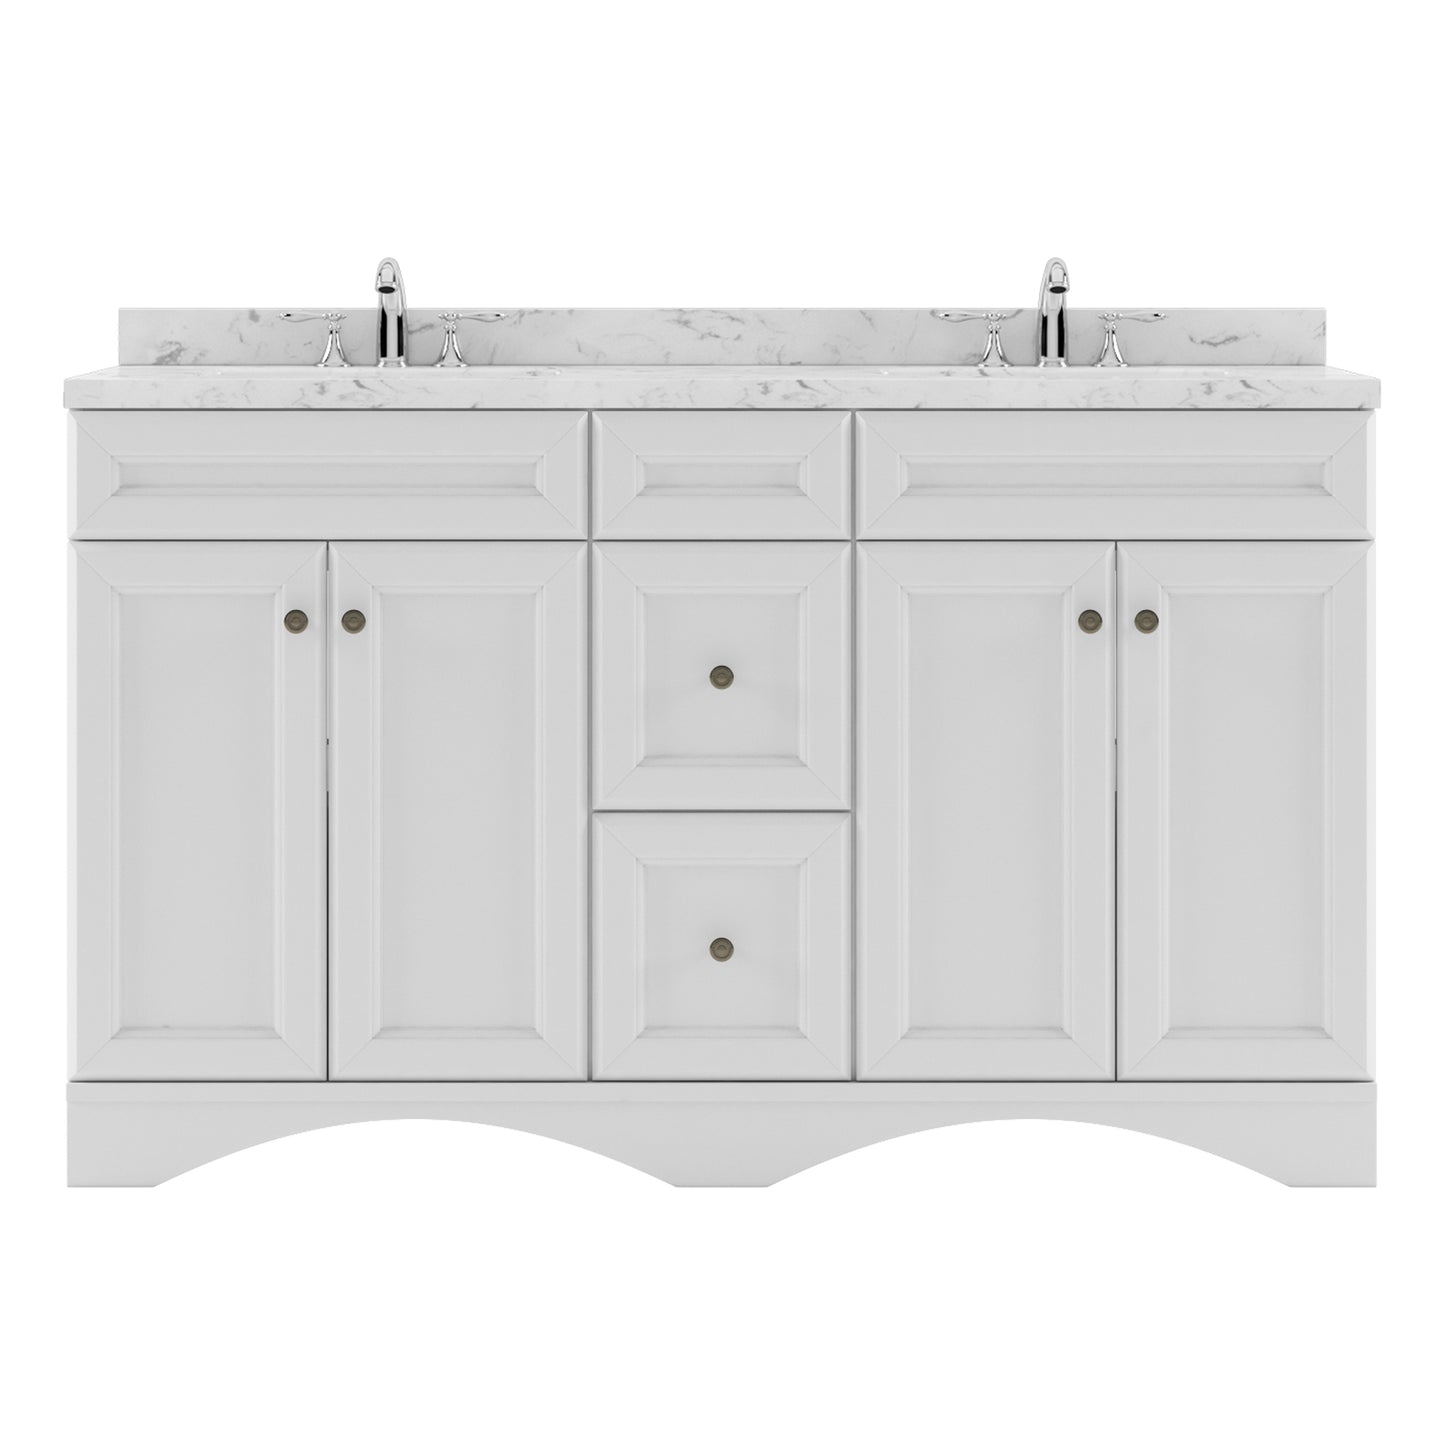 Virtu USA Talisa 60" Double Bath Vanity in White with White Quartz Top and Square Sinks with Polished Chrome Faucets with Matching Mirror - Luxe Bathroom Vanities